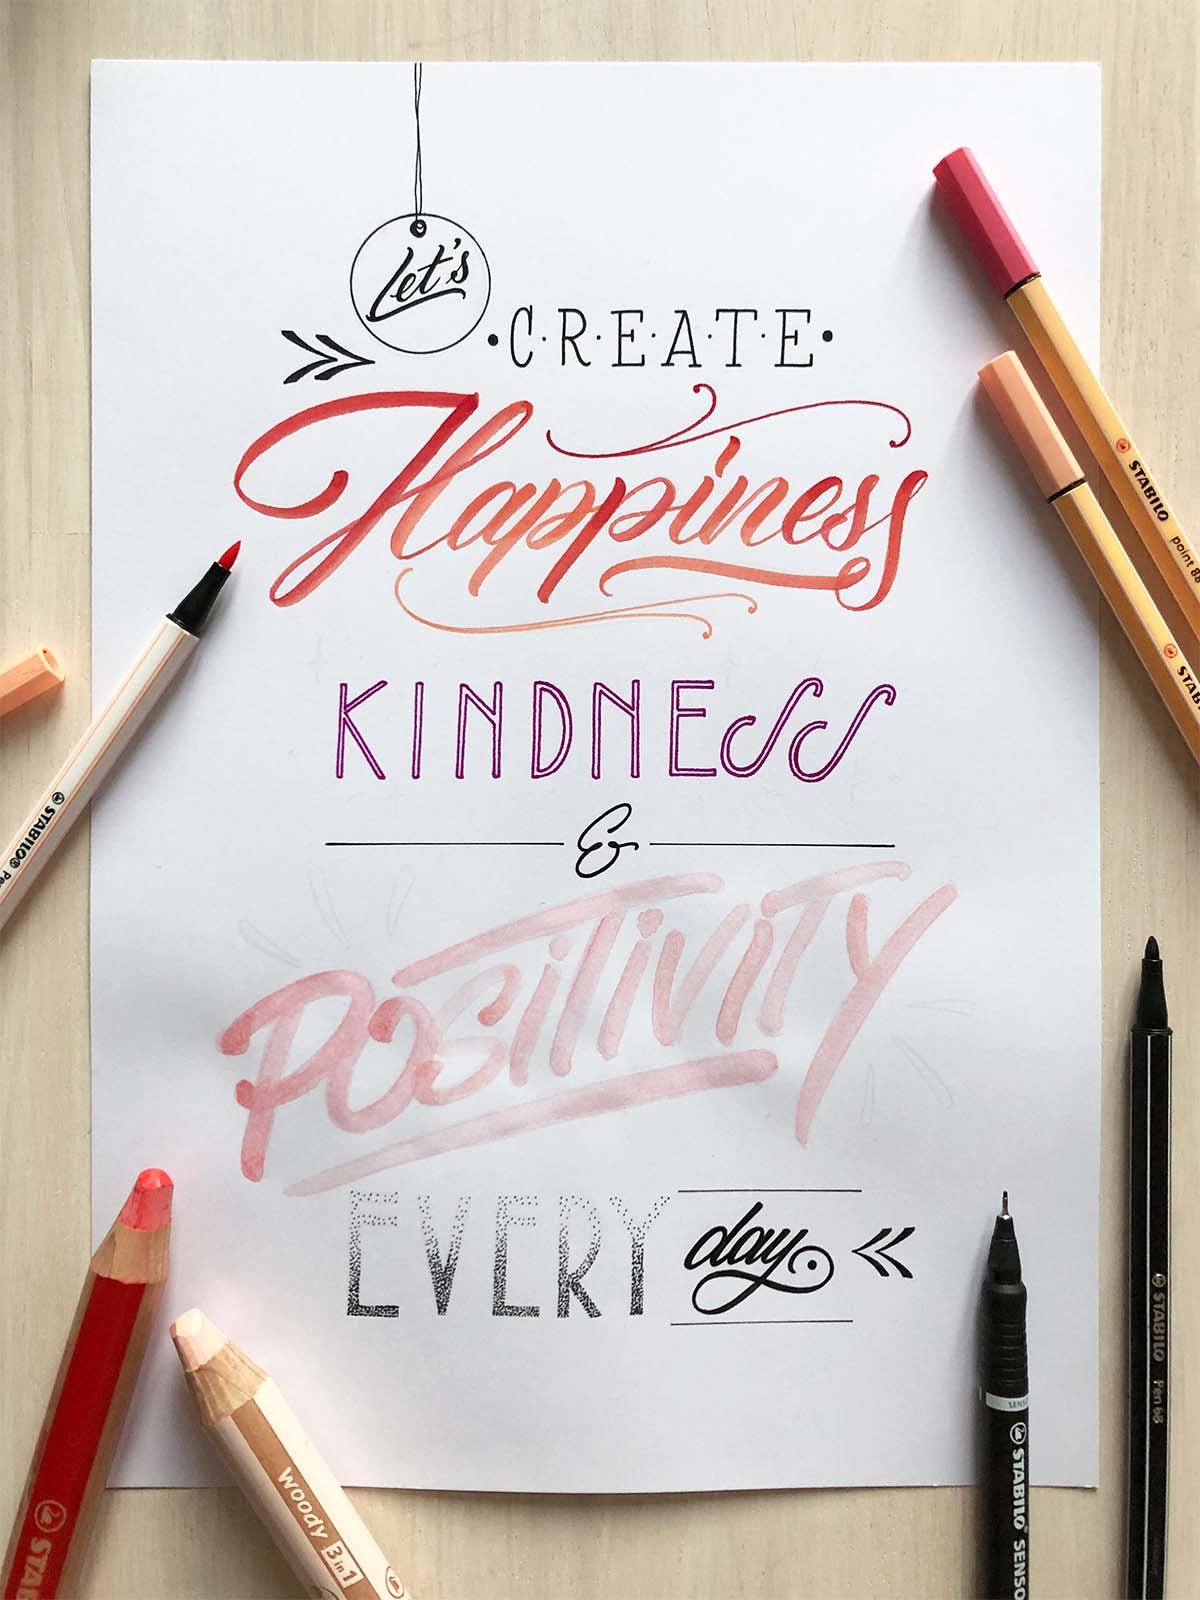 STABILO - FAN ART featuring @indirarealdeal with her Brush pen calligraphy,  using the STABILO pen 68 brush while sharing an online dialogue with her  friends and followers. 🎨🖌🥰 Are you an Introvert